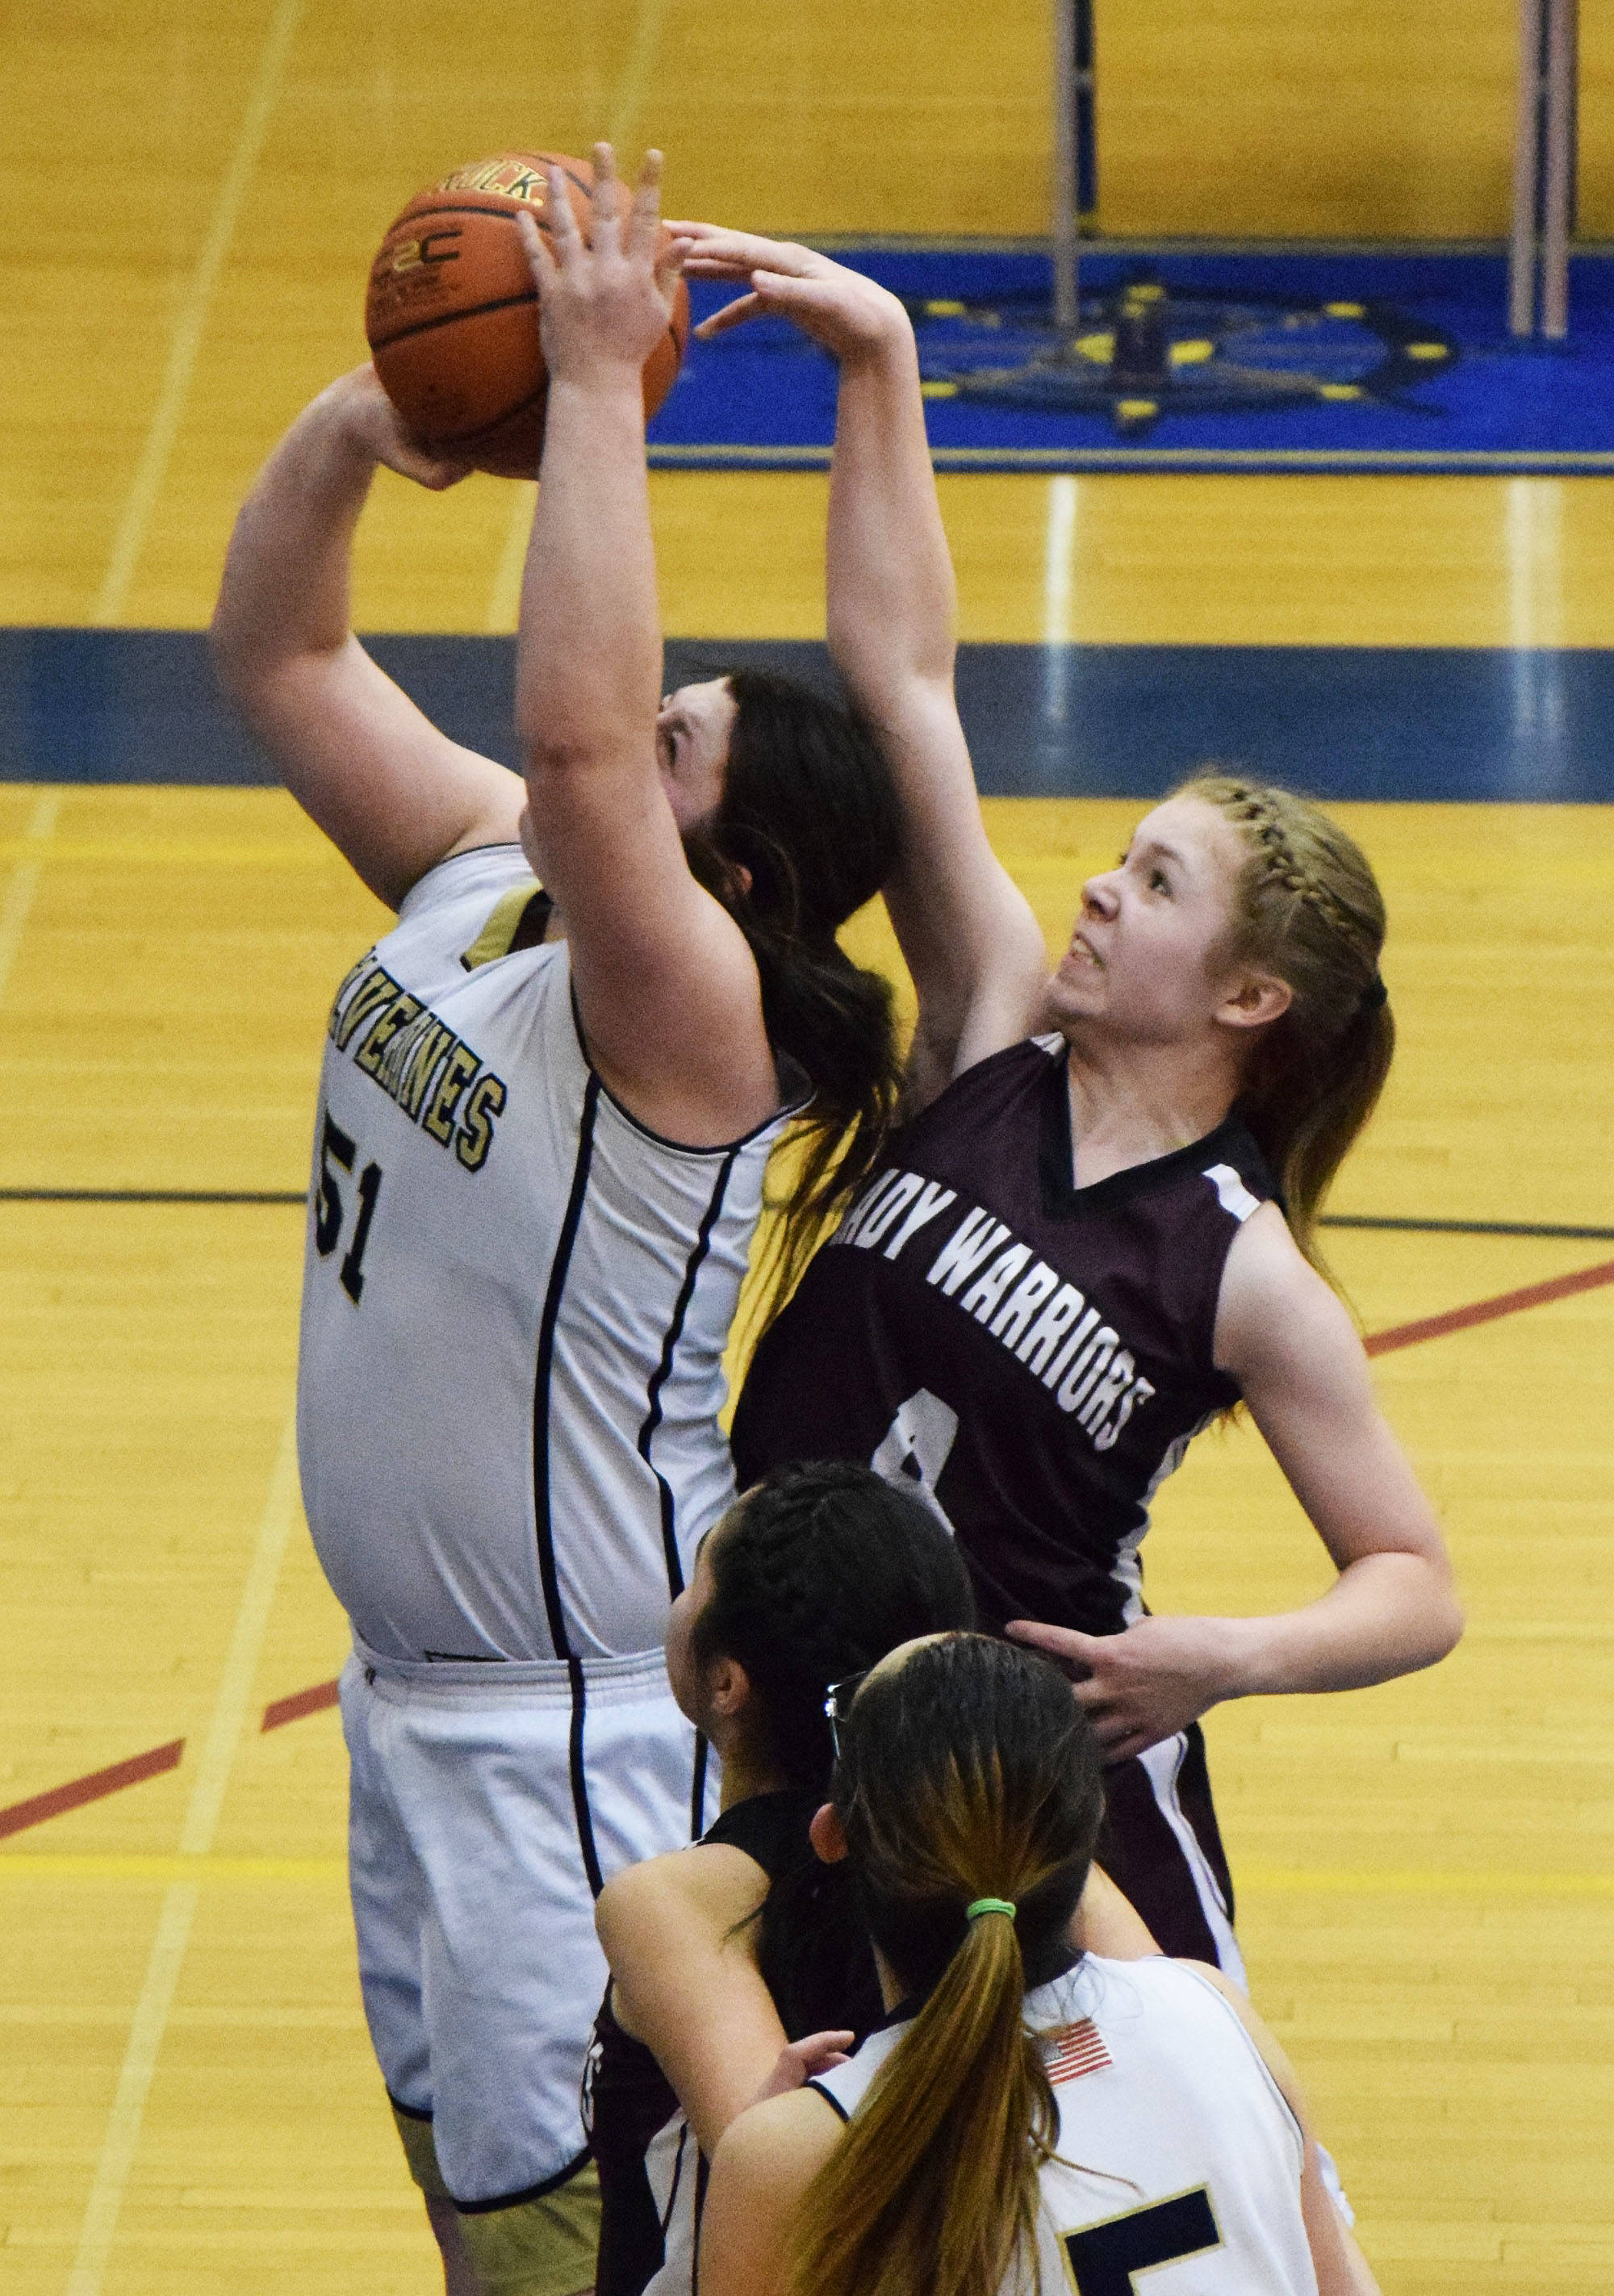 Nikolaevsk’s Kristin Klaich (right) puts a block on Ninilchik’s Mikayla Clark in Friday’s Peninsula Conference girls championship game at Homer High School. (Photo by Joey Klecka/Peninsula Clarion)